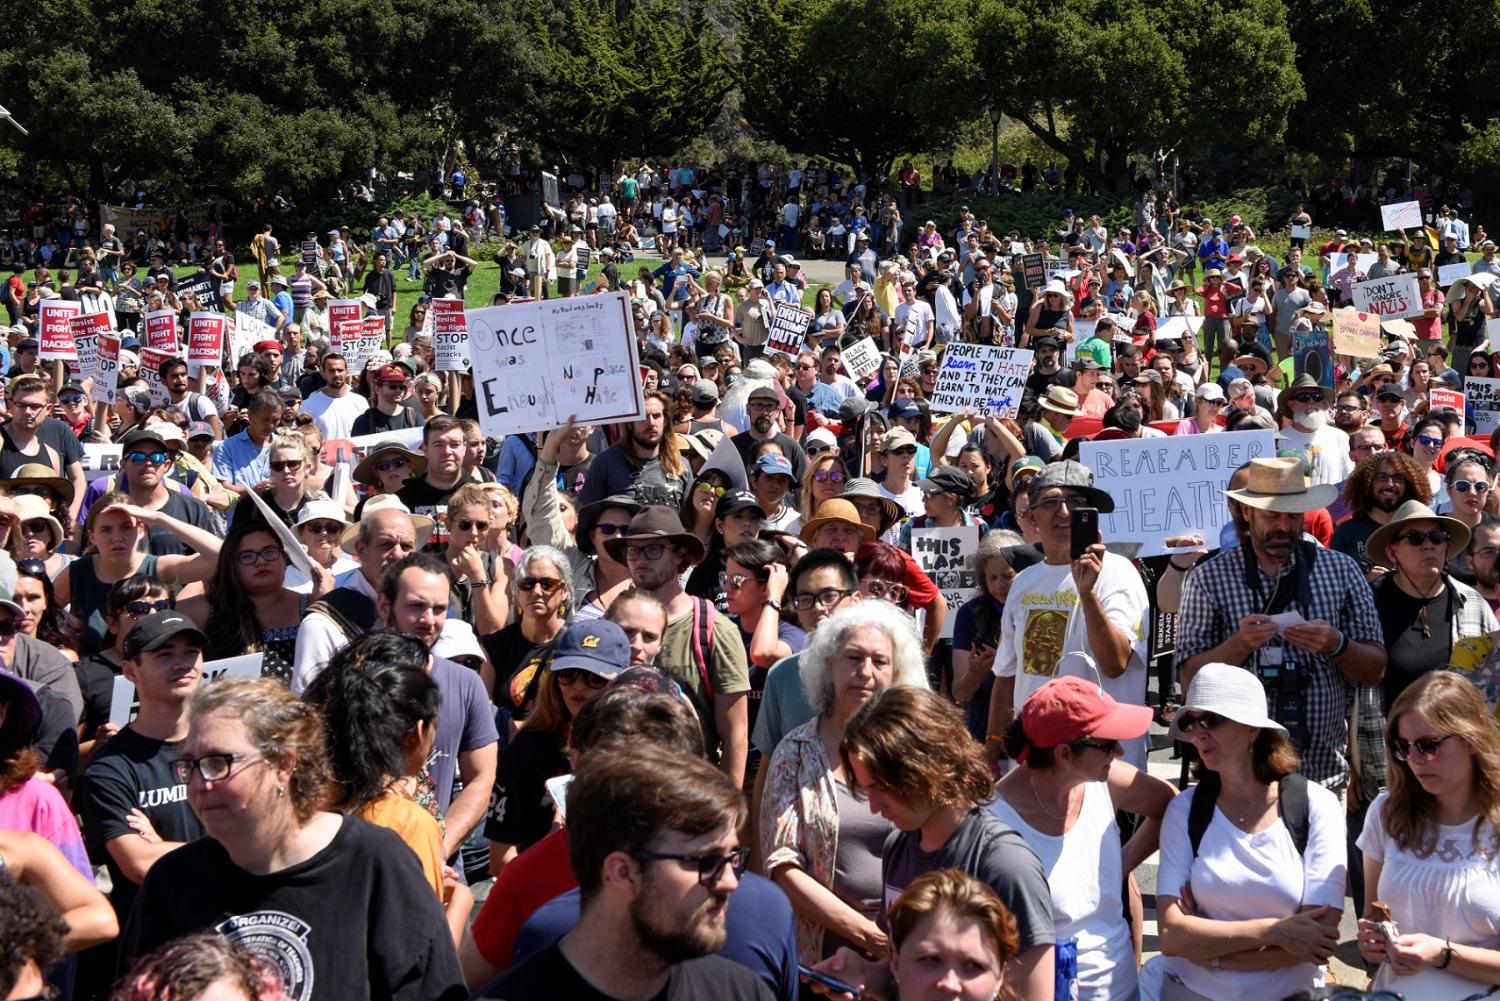 Counter protesters rally at a cancelled No Marxism in America event in Berkeley, California, U.S. August 27, 2017. REUTERS/Kate Munsch - RC1BDEE0B810